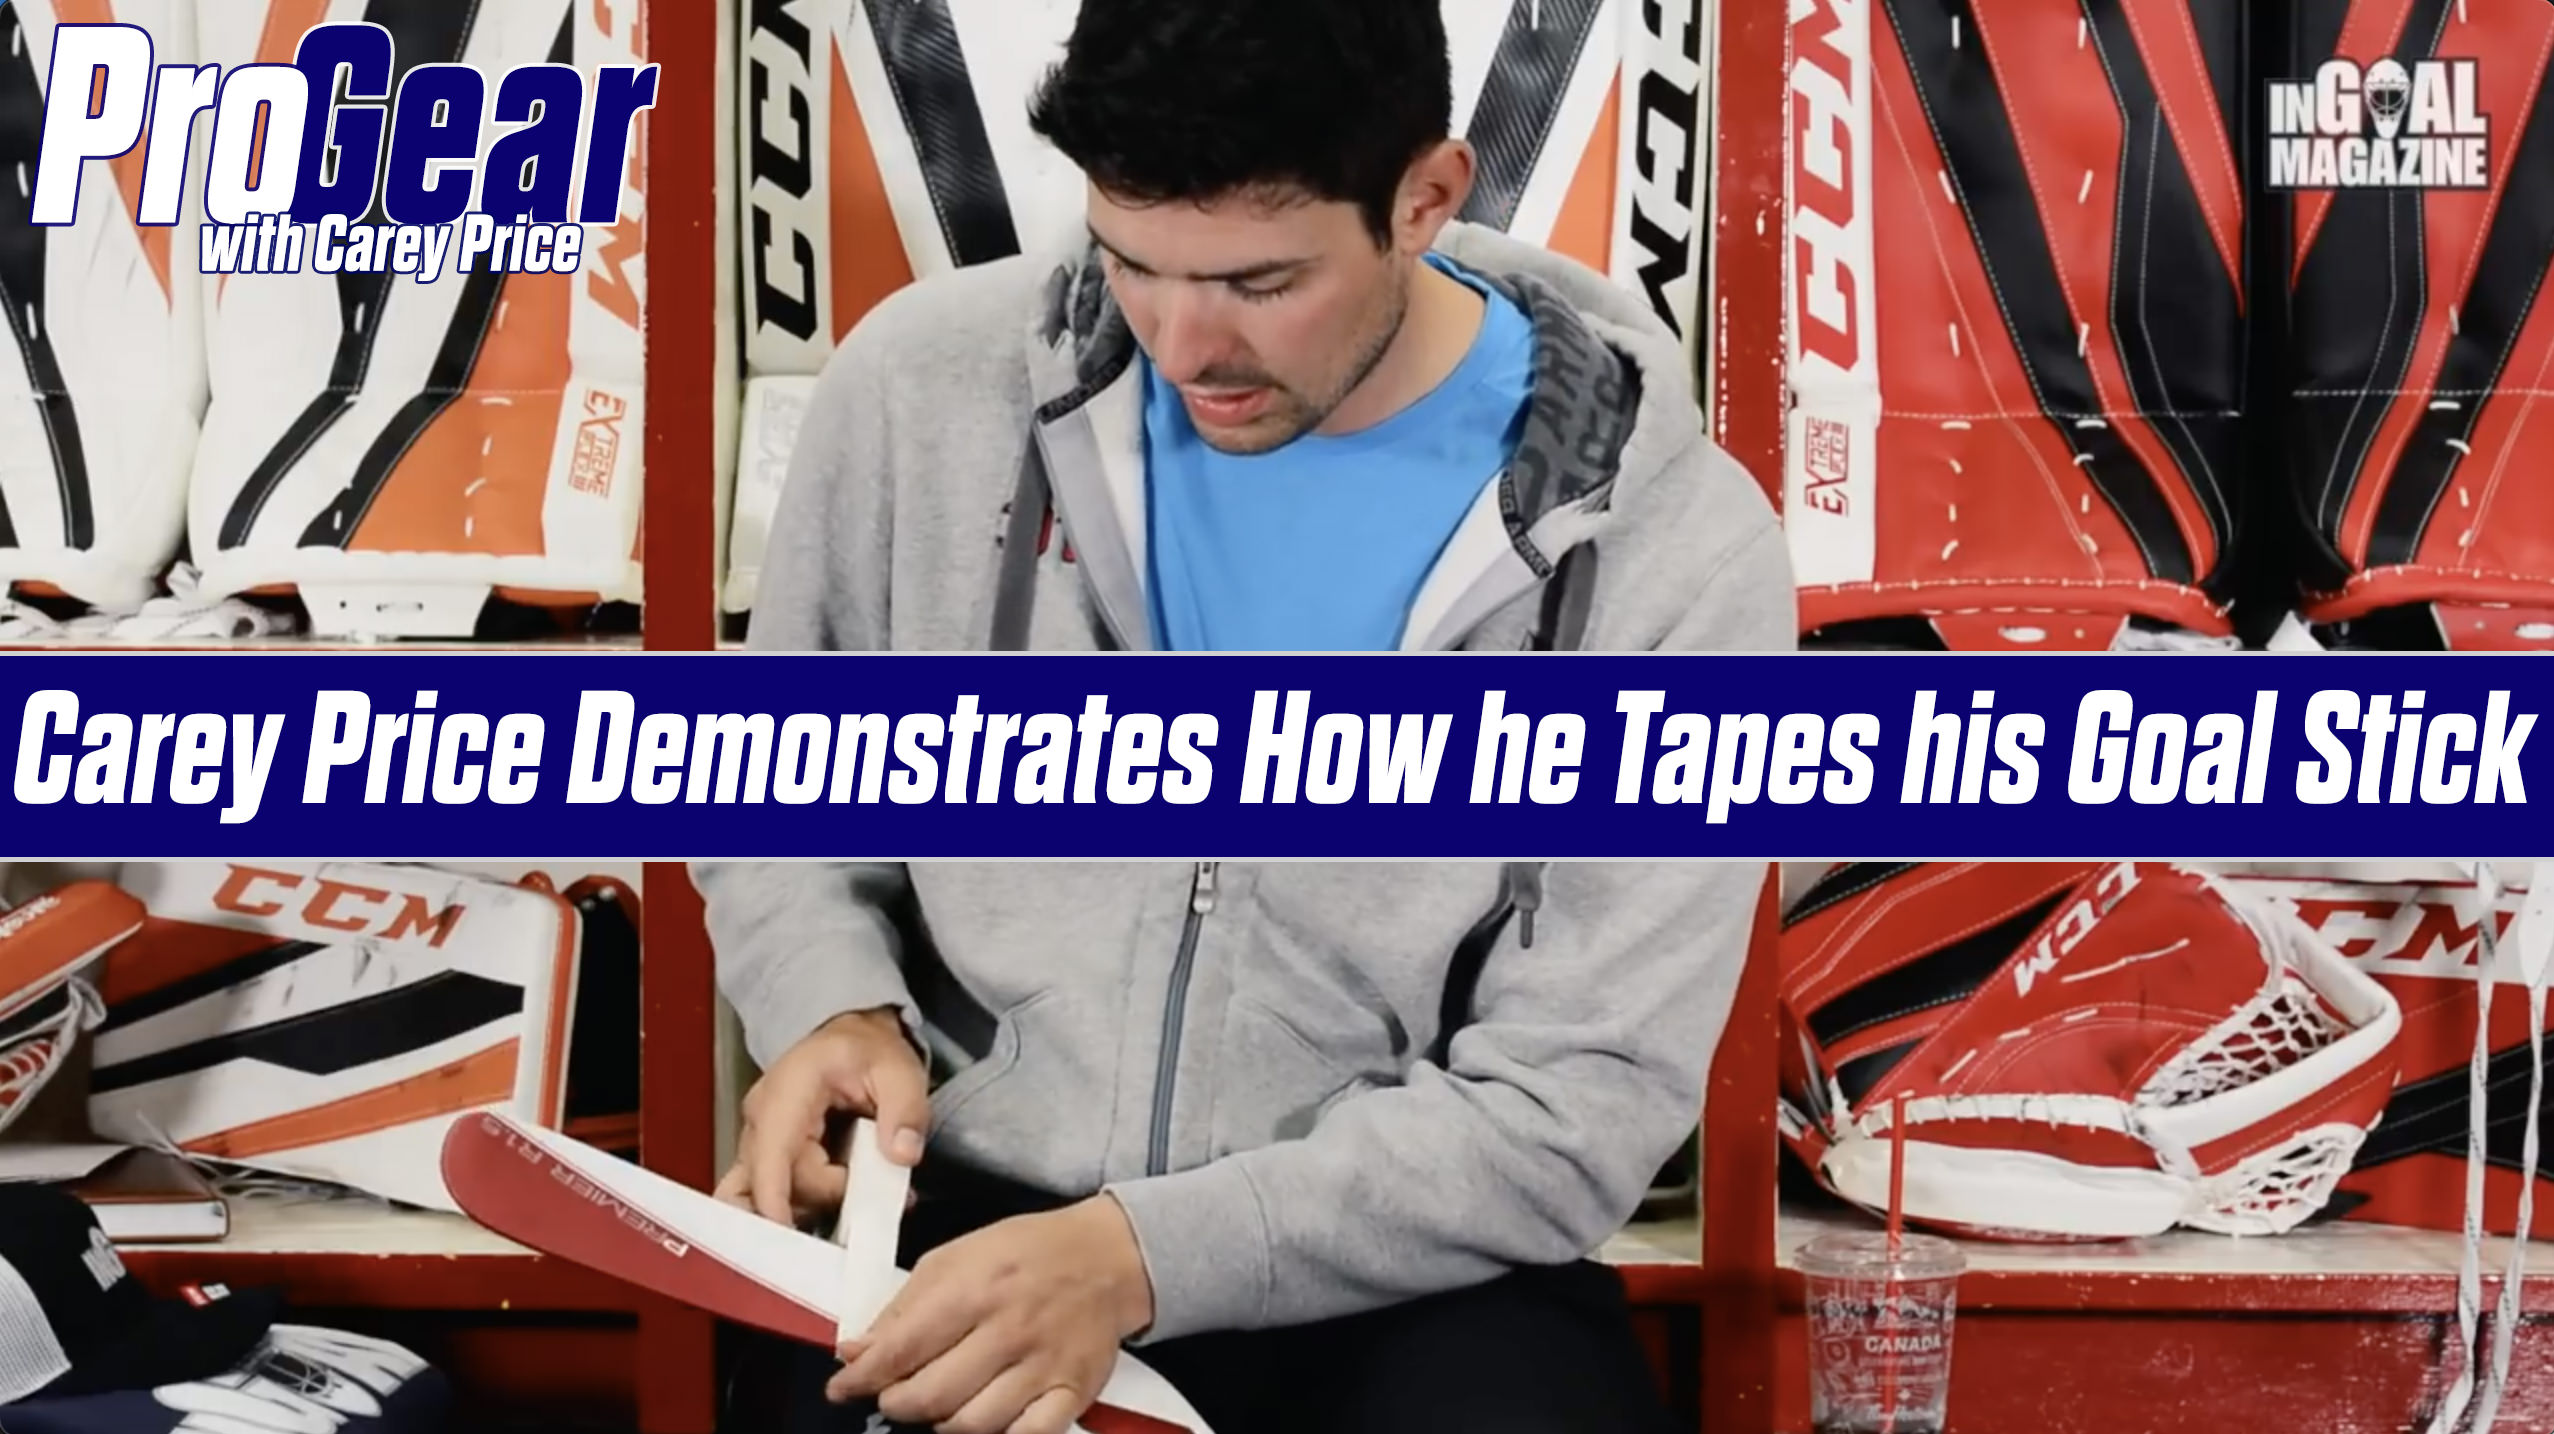 Pro Gear: Carey Price Demonstrates How he Tapes his Goal Stick